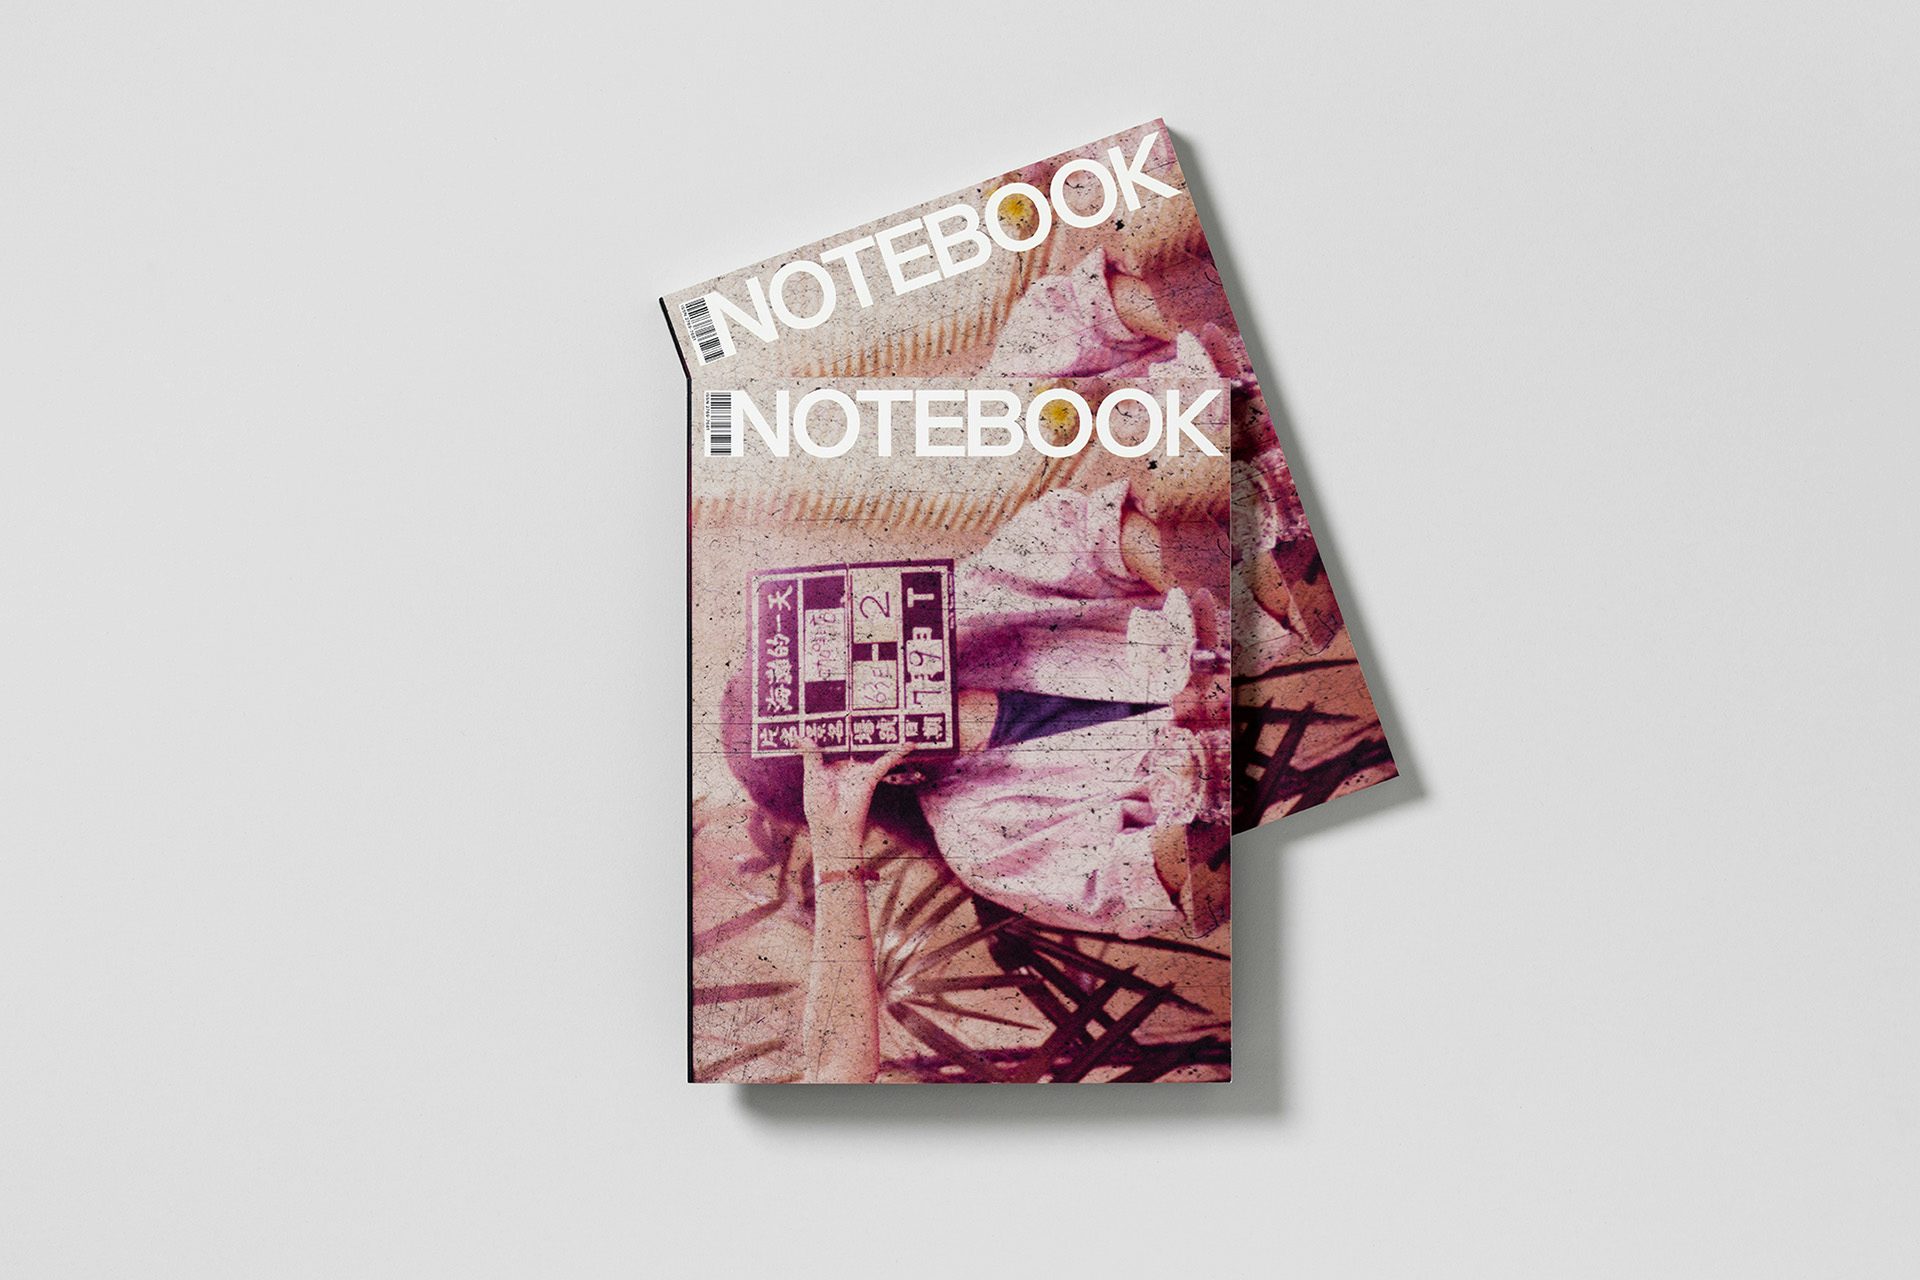 Photograph of Mubi's Notebook magazine cover of an image by Christopher Doyle